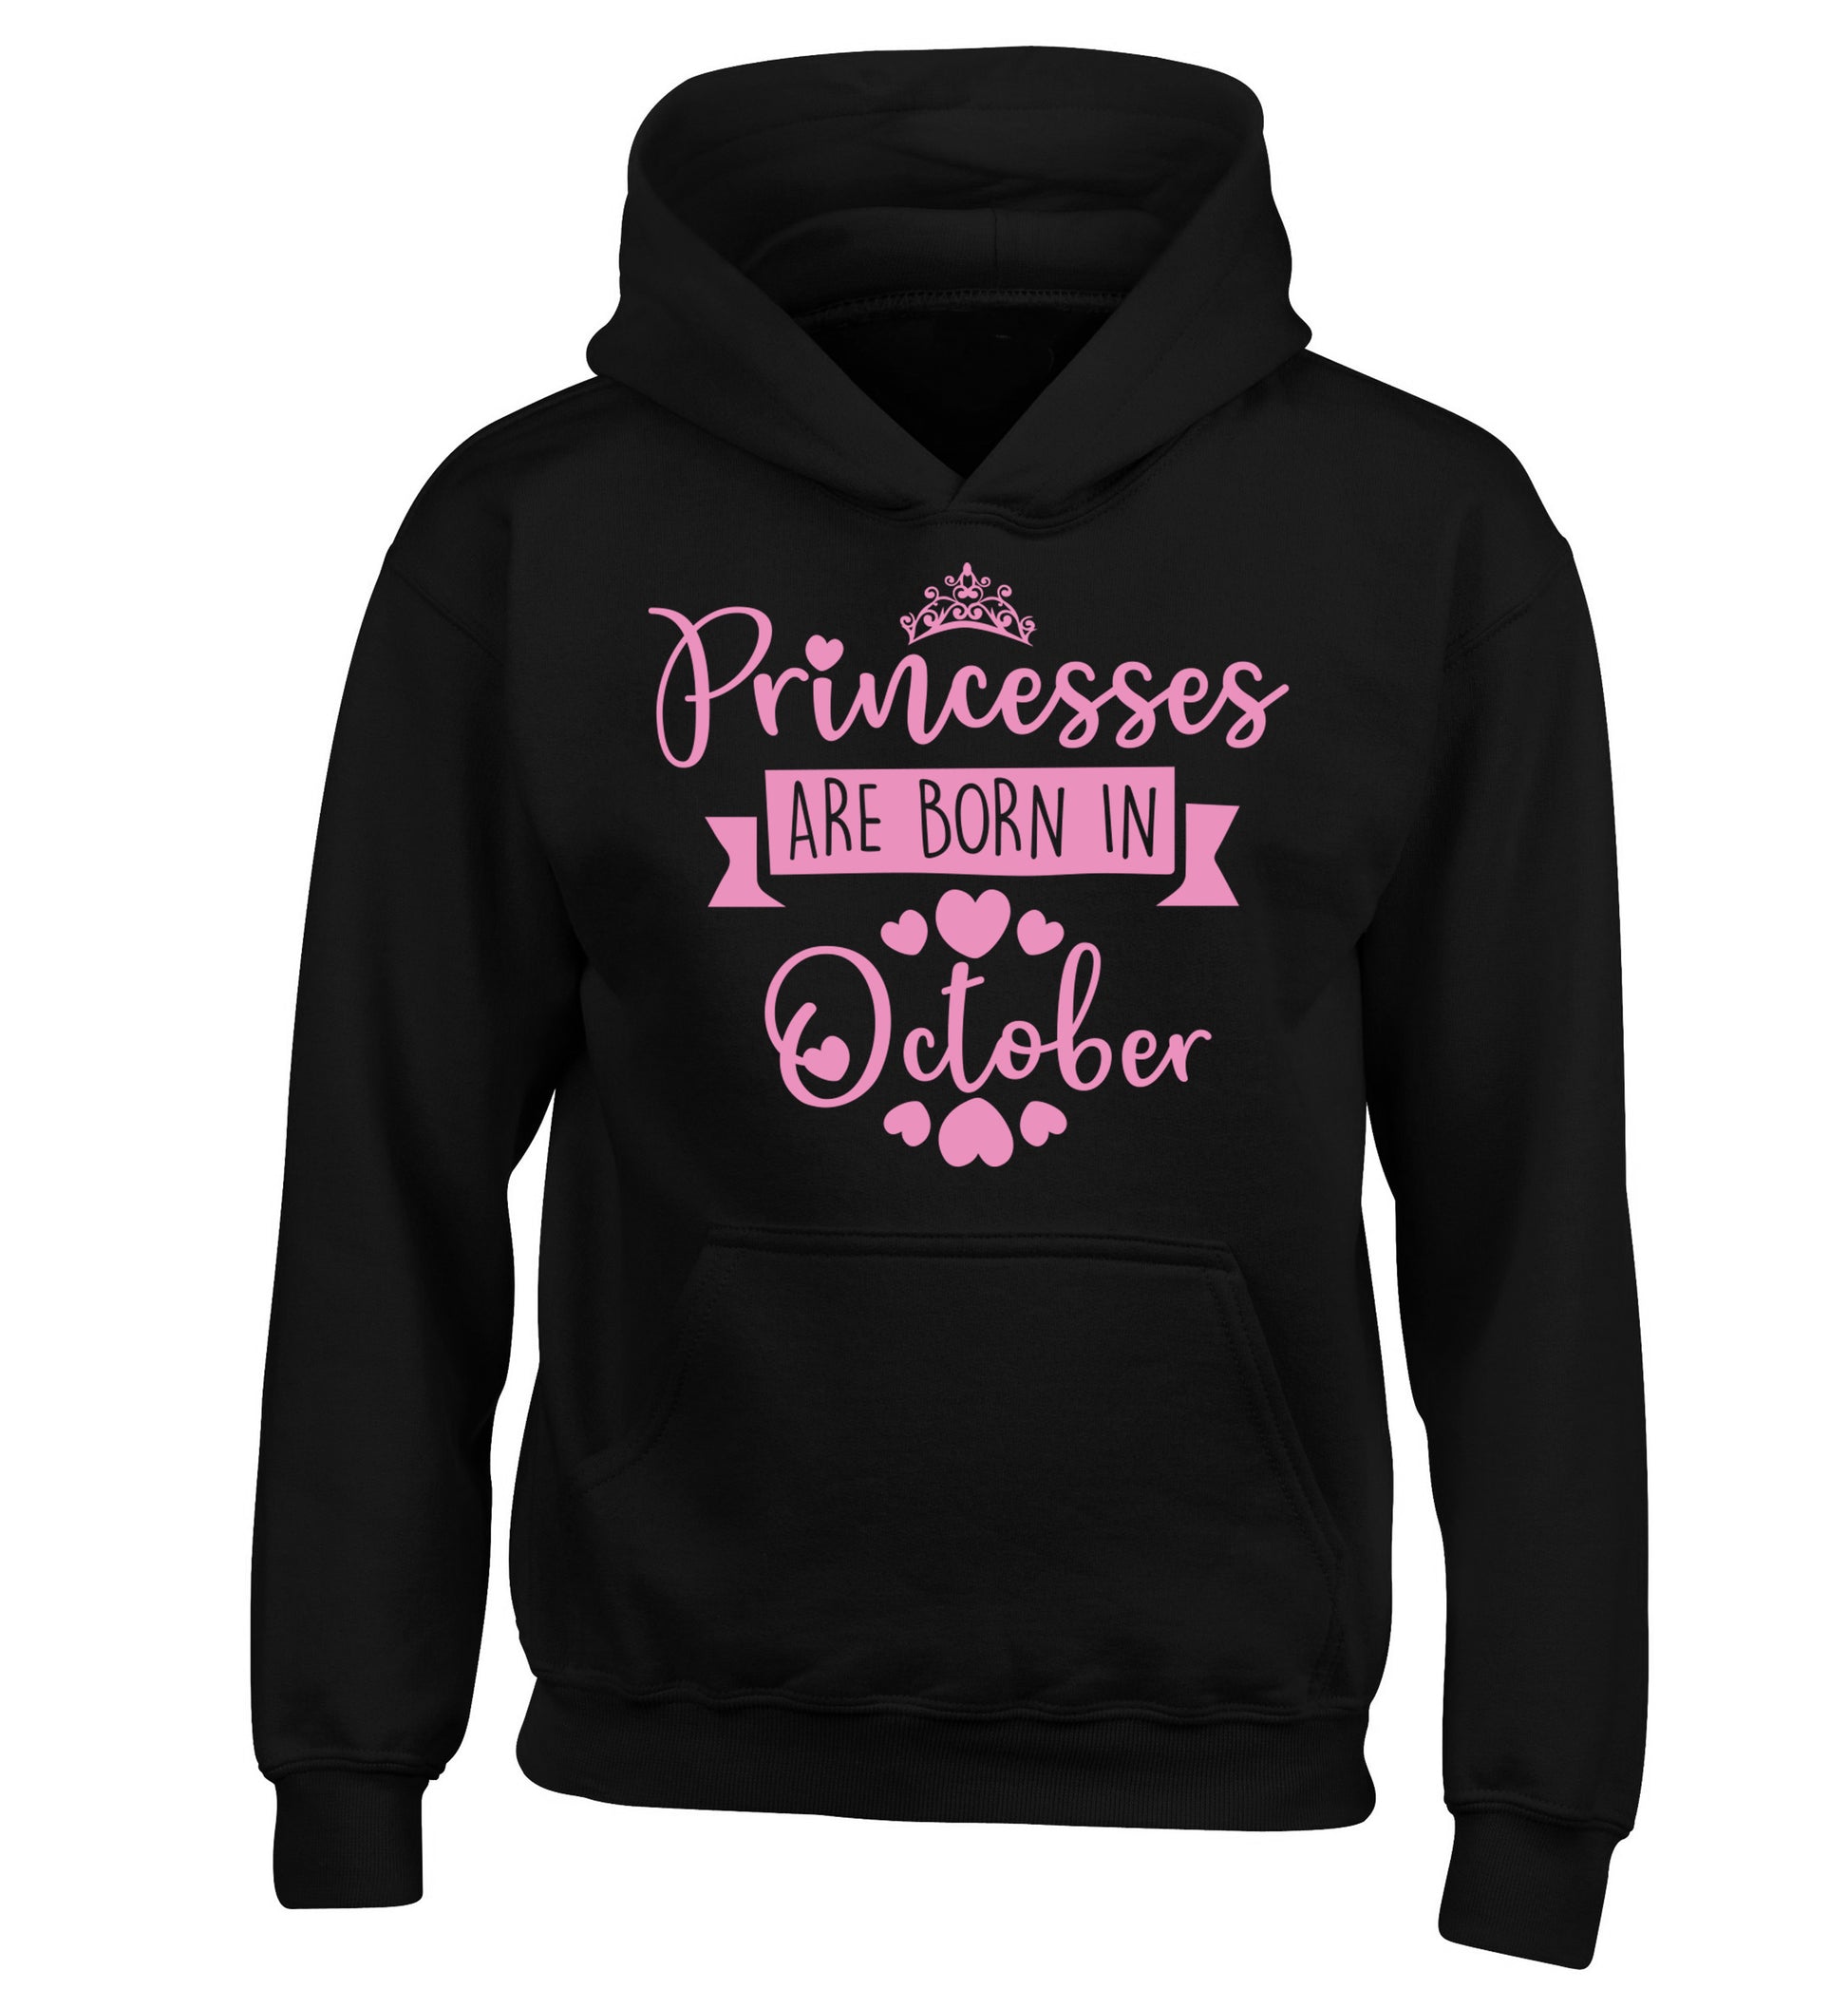 Princesses are born in October children's black hoodie 12-13 Years